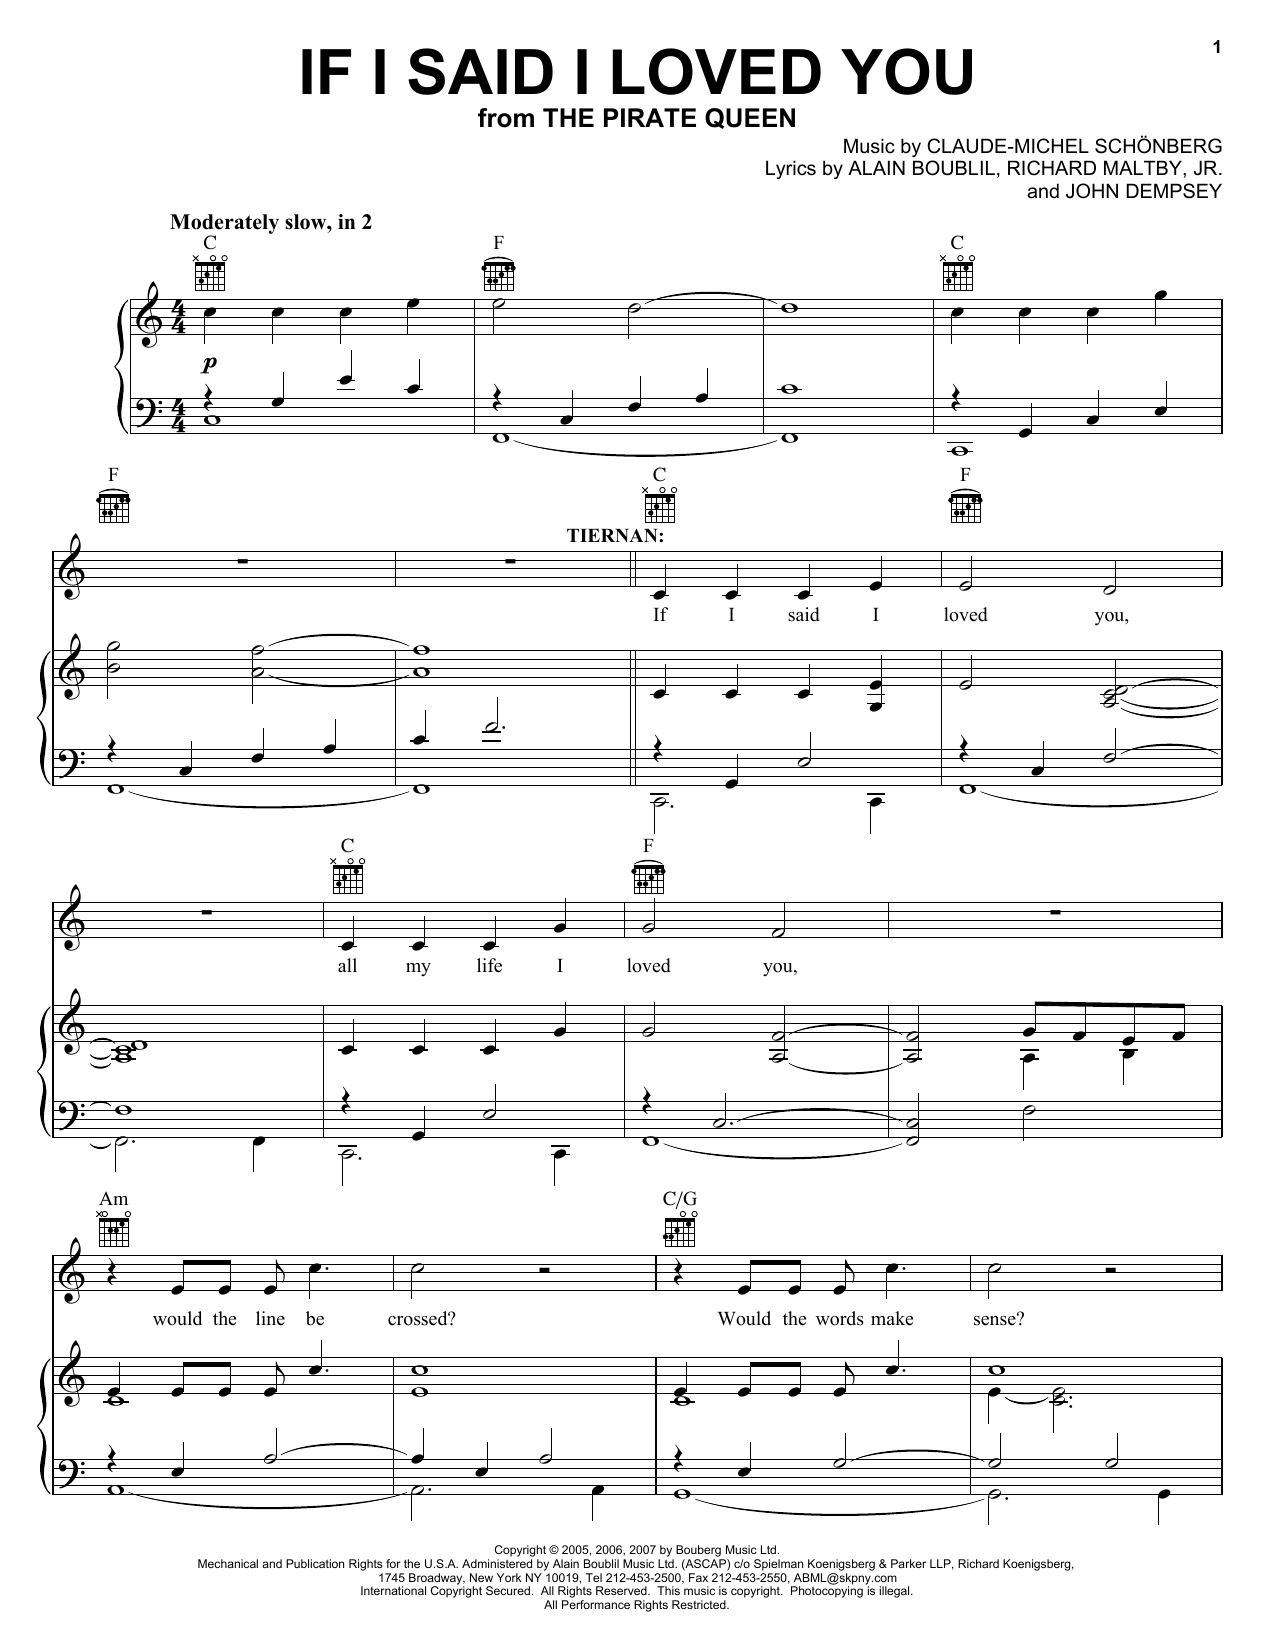 If I Said I Loved You (from The Pirate Queen) sheet music